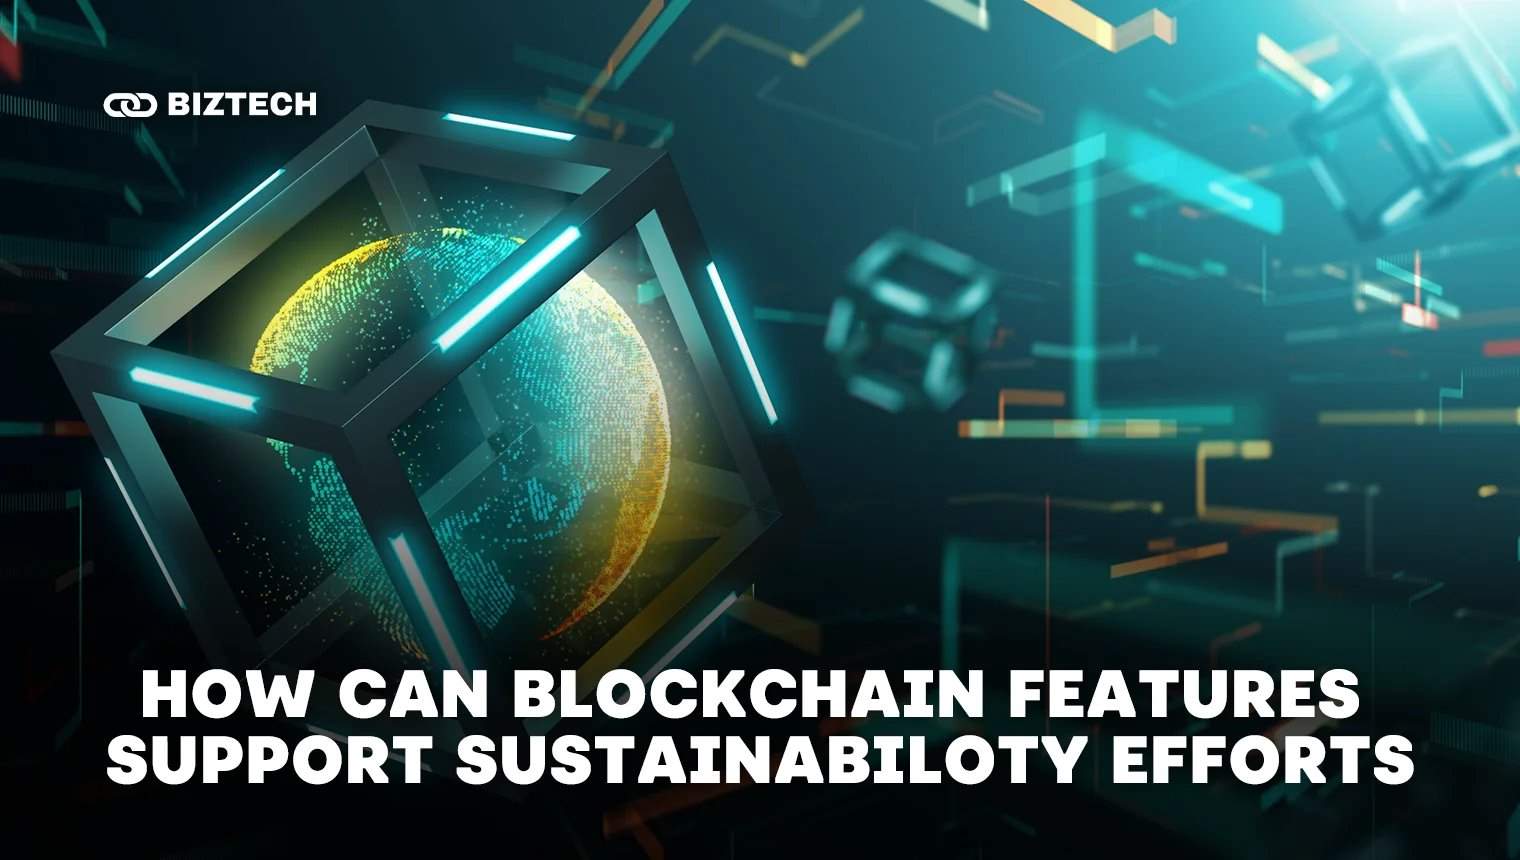 Here are 13 Ways How Blockchain Features Can Support Sustainability Efforts